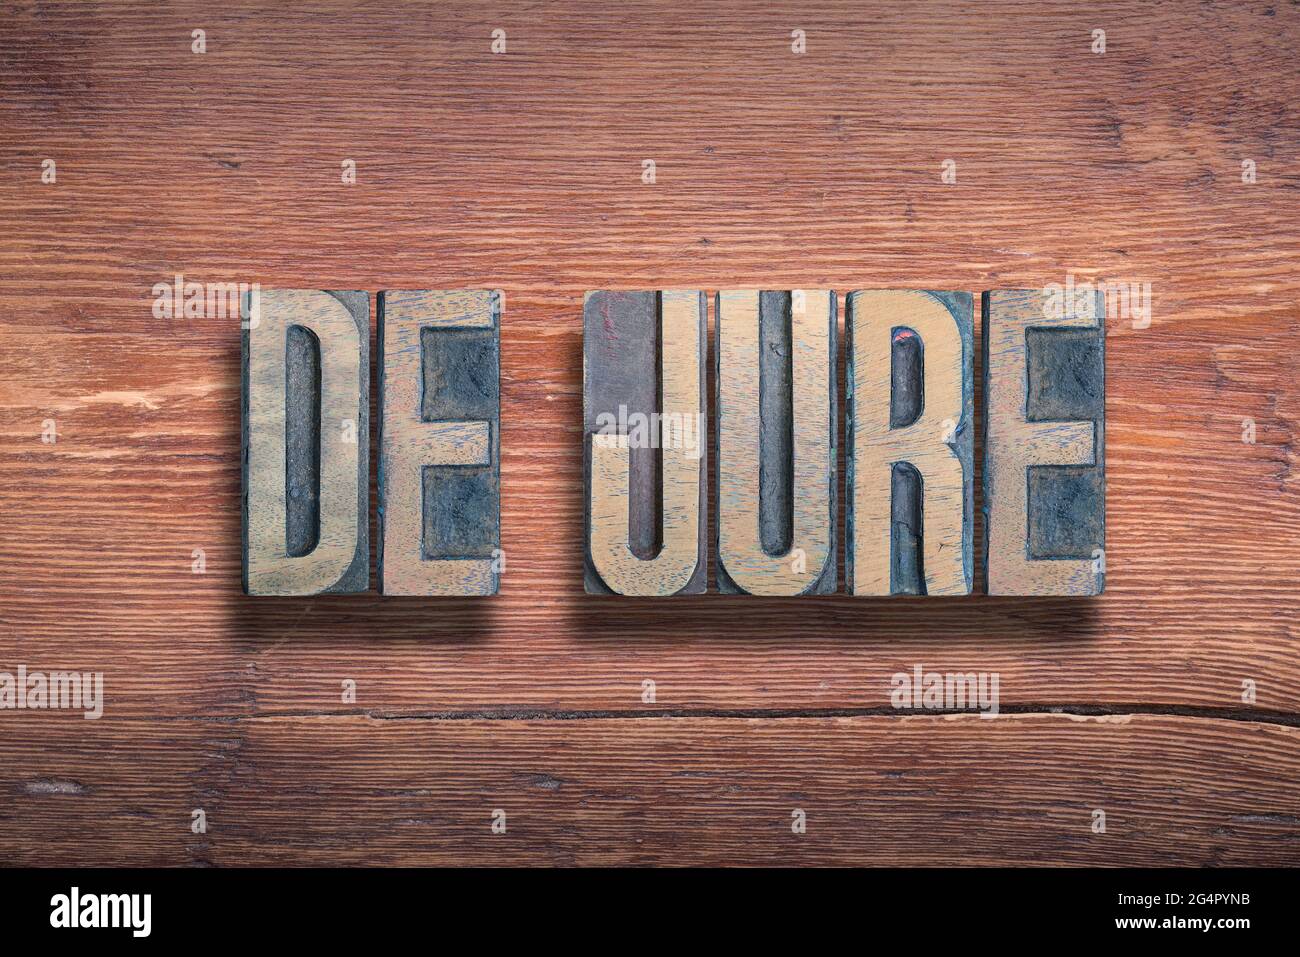 de jure ancient Latin saying meaning «something established by law» combined on vintage varnished wooden surface Stock Photo